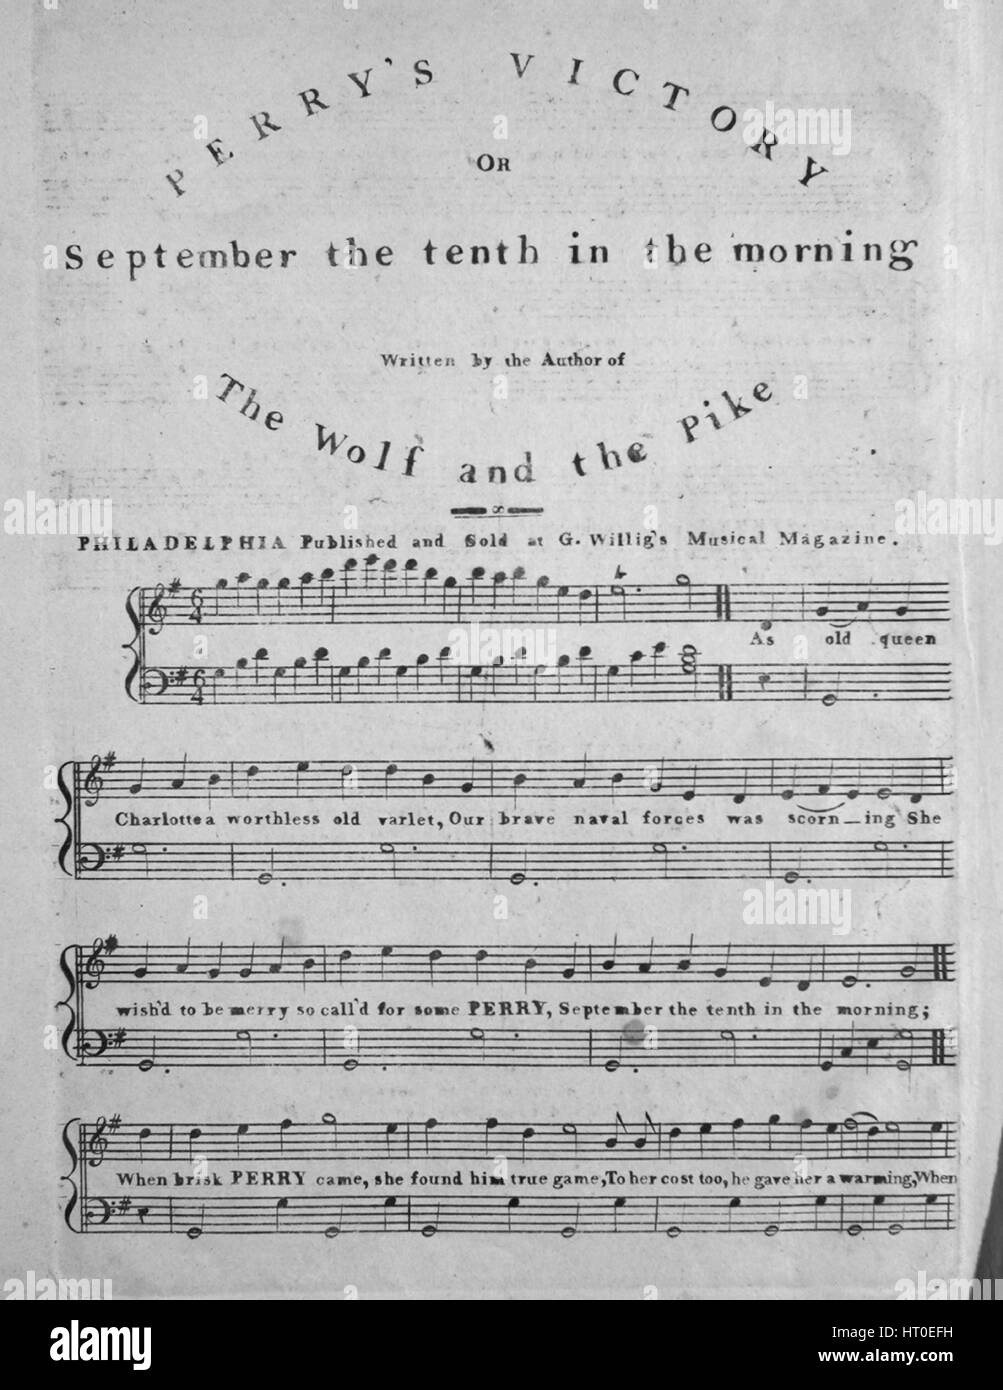 Sheet music cover image of the song 'Perry's Victory, or September the tenth in the morning', with original authorship notes reading 'Written by the Author of The Wolf and the Pike', United States, 1900. The publisher is listed as 'G. Willig's Musical Magazine', the form of composition is 'strophic', the instrumentation is 'piano and voice', the first line reads 'As old queen Charlotte a worthless old varlet, our brave naval forces was scorning', and the illustration artist is listed as 'None'. Stock Photo